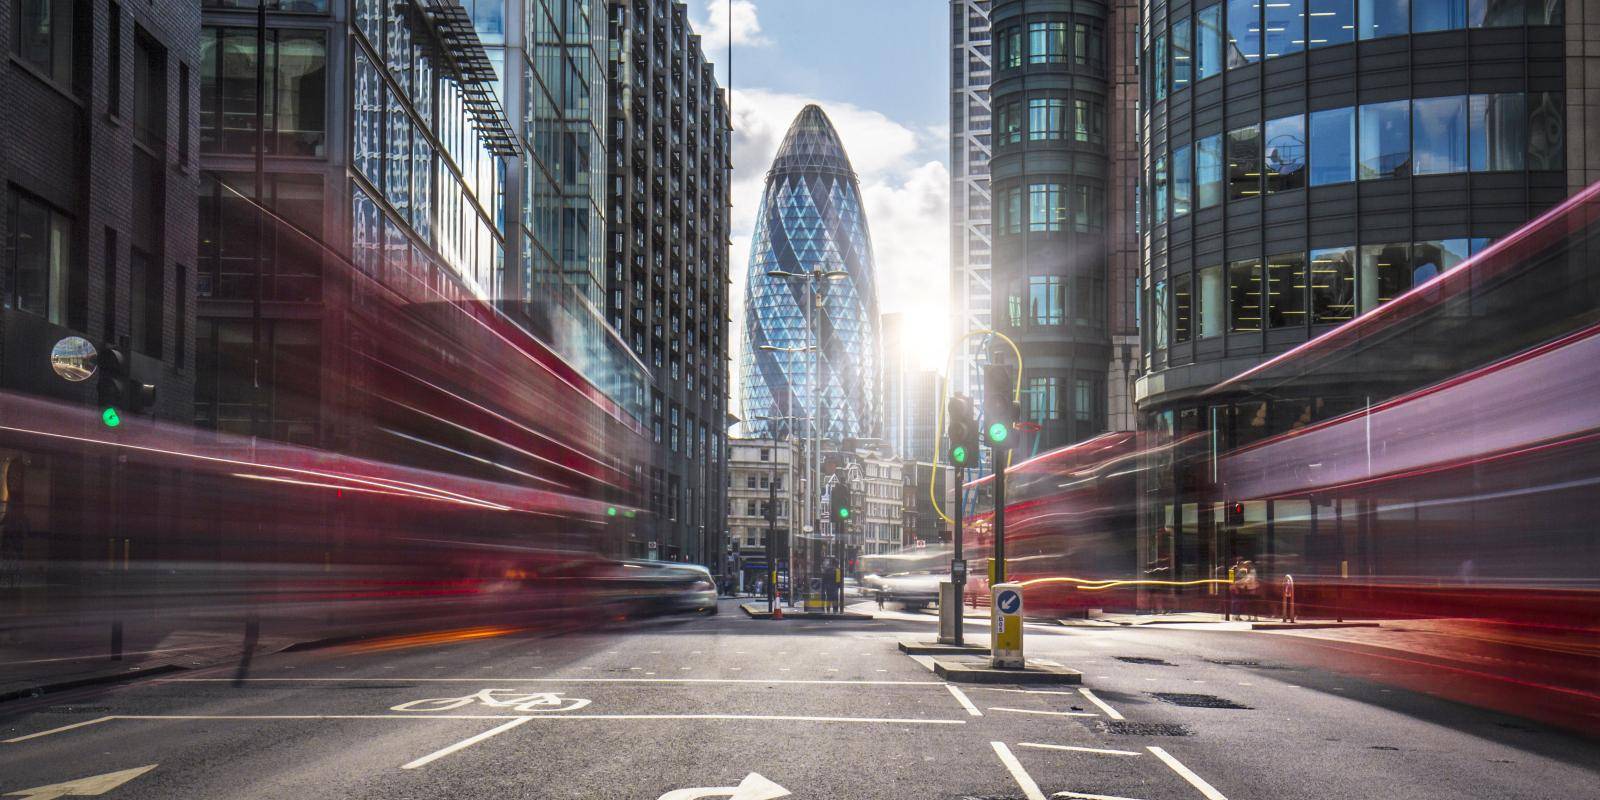 An image of the 30 St Mary Axe building in London